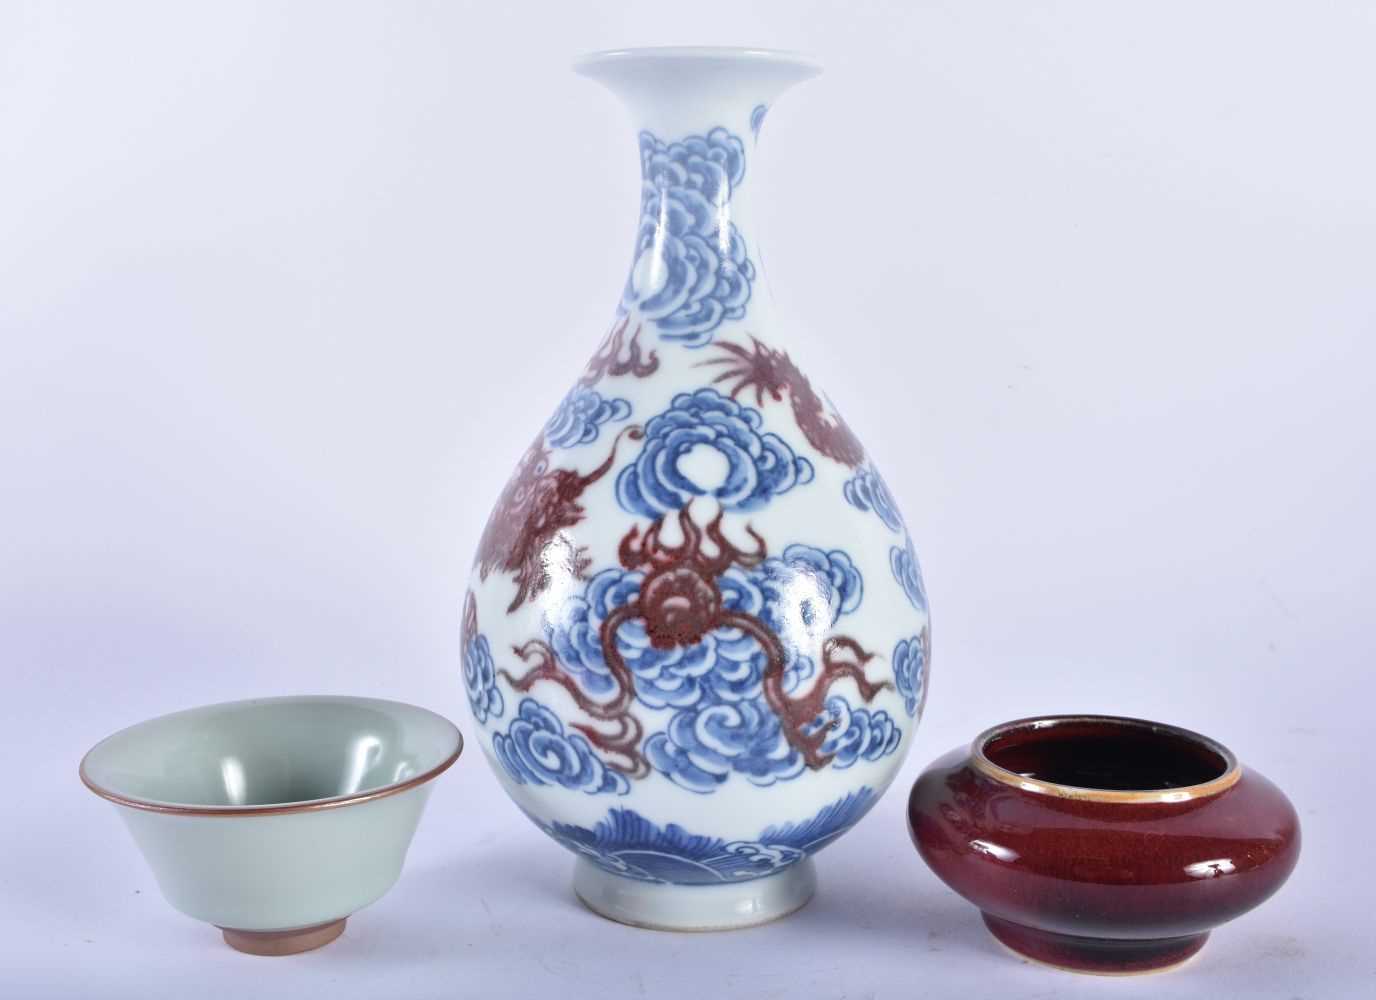 A CHINESE IRON RED BLUE AND WHITE PORCELAIN DRAGON VASE 20th Century, together with a bowl & brush - Image 2 of 6